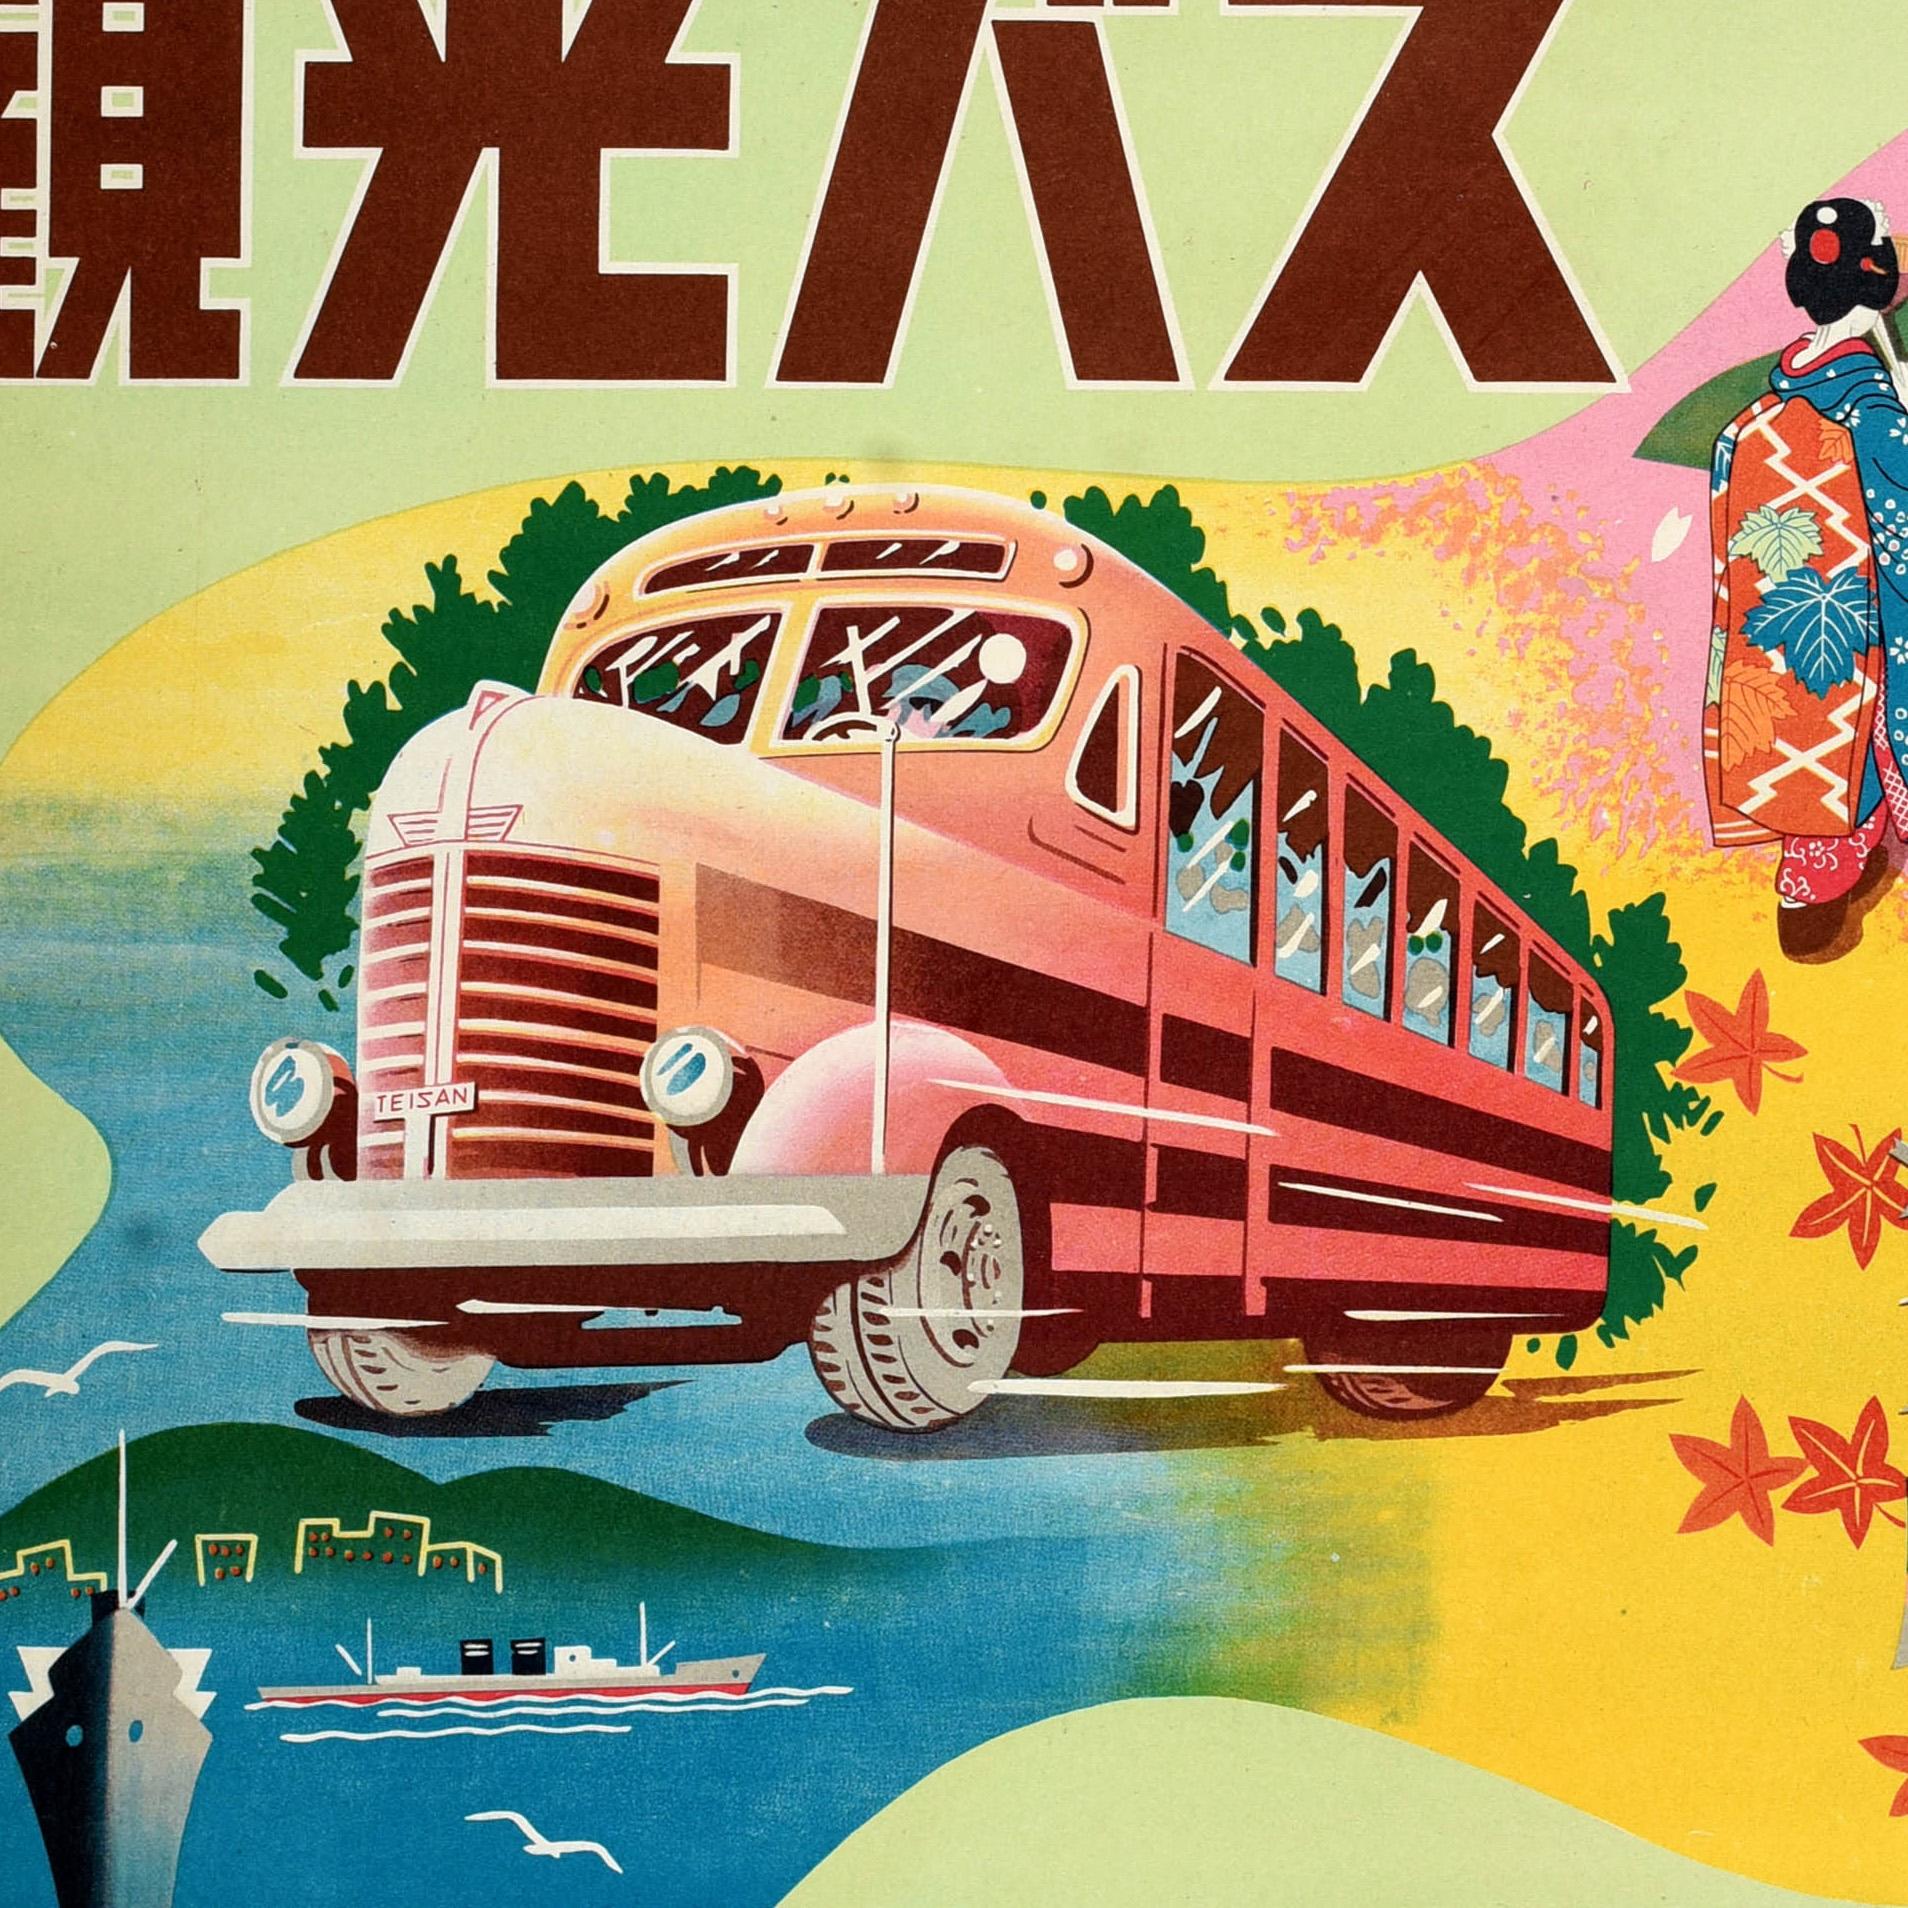 Original vintage travel poster for Sightseeing Bus trips in Japan issued by Kansai Teisan Auto Co Ltd featuring a colourful design depicting a tour bus driving through a collage of Japanese scenery including ships sailing at sea with city buildings